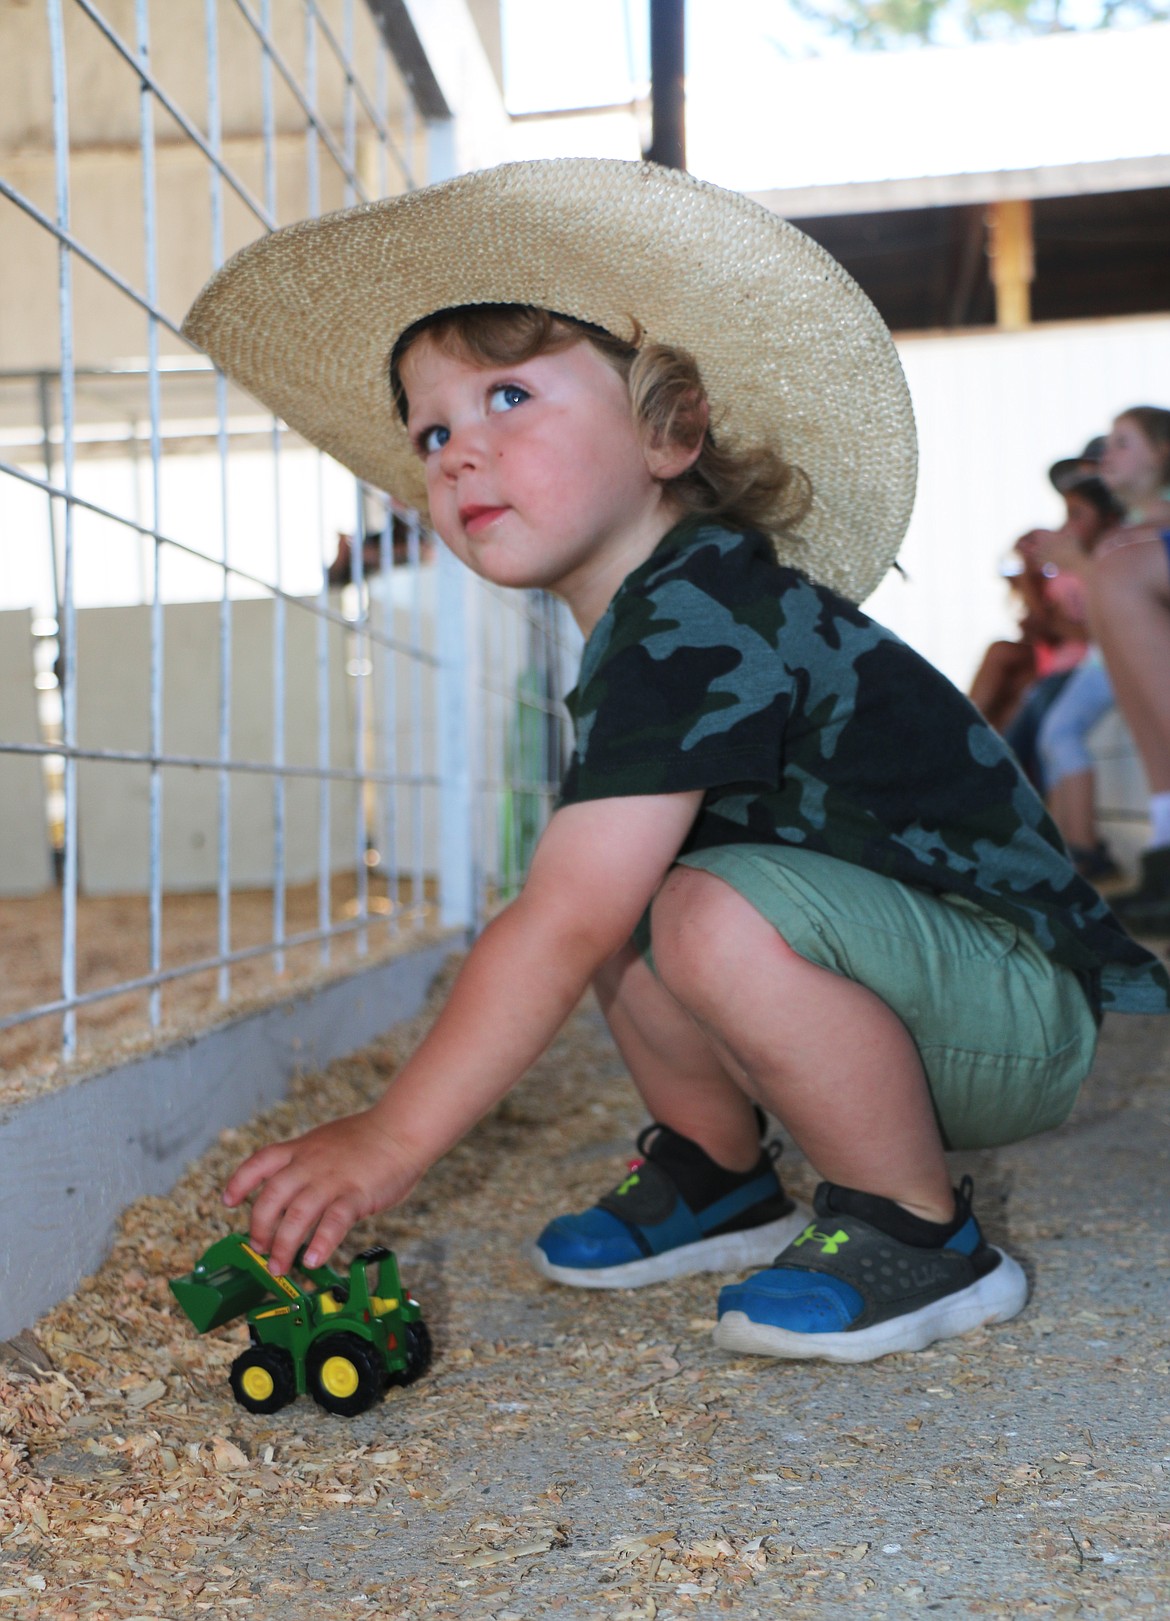 Zeke Schoonover plays with his tractor while family members watch a swine competition at the Bonner County Fair on Tuesday. He is the son of Libby and Isaac Schoonover of Sandpoint.